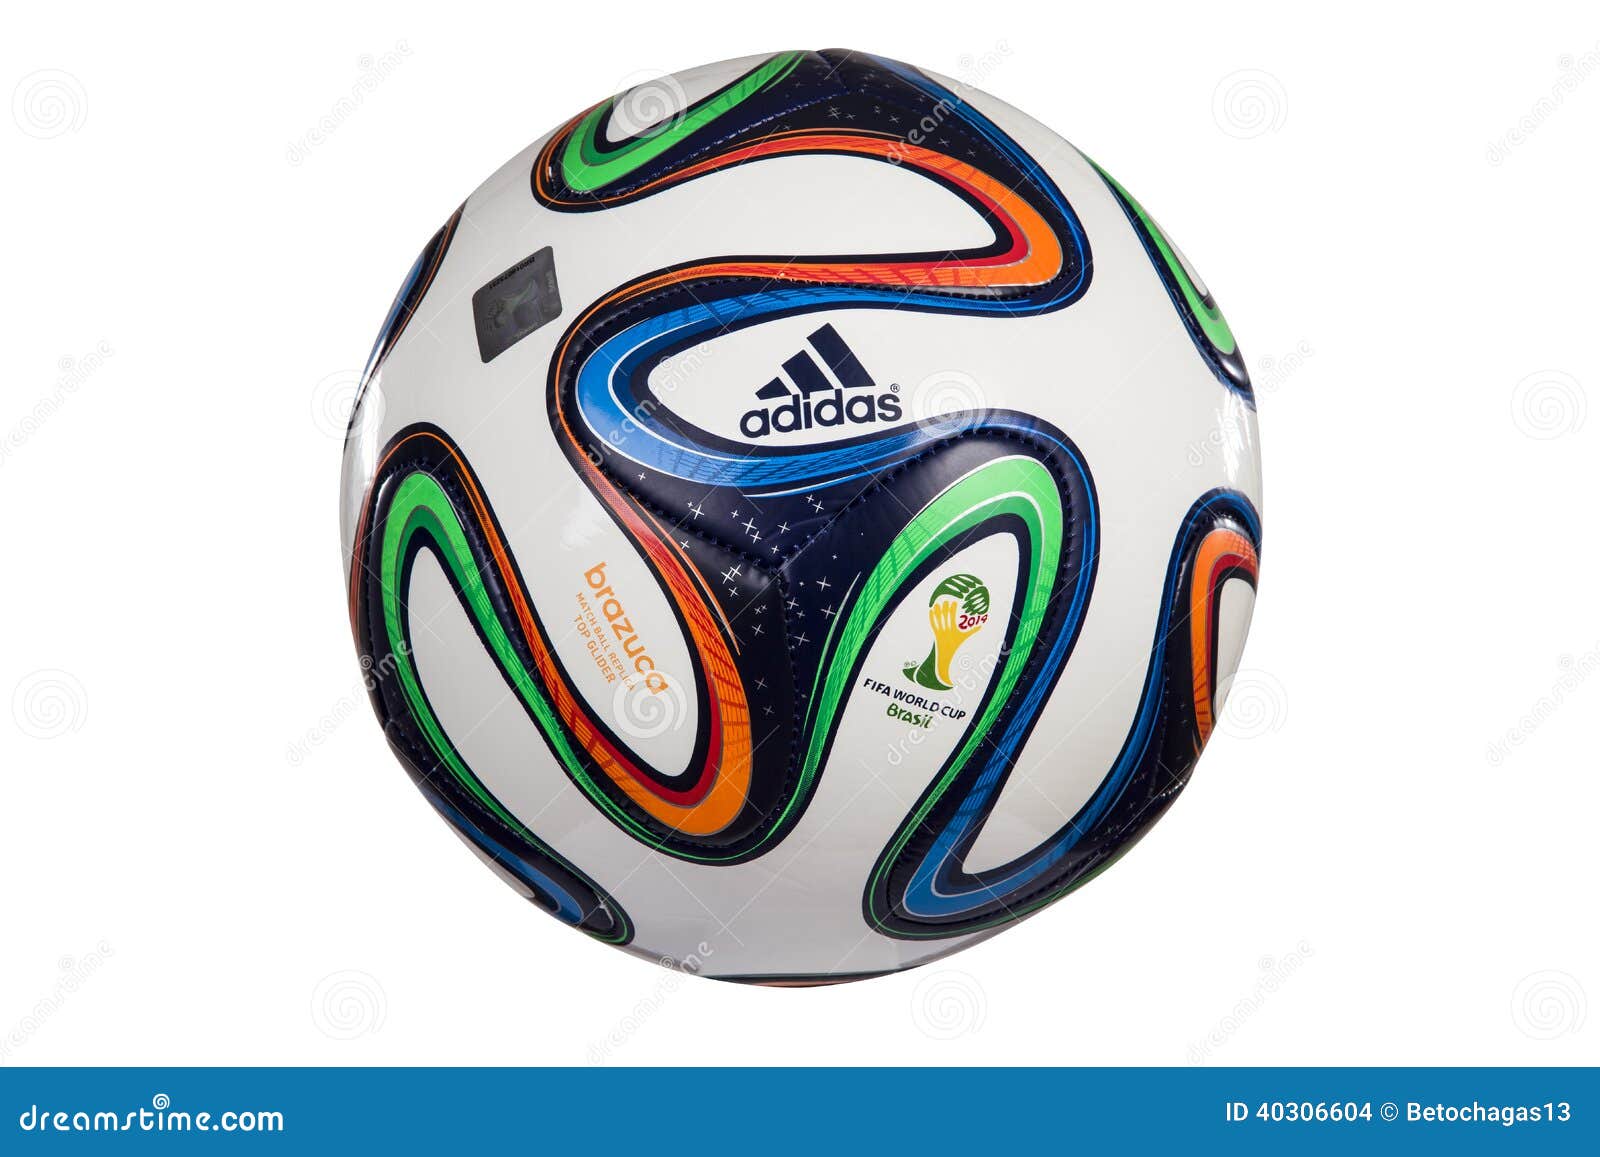 Adidas Brazuca World Cup 2014 Football Editorial Stock Image - Image of  competition, league: 40306604